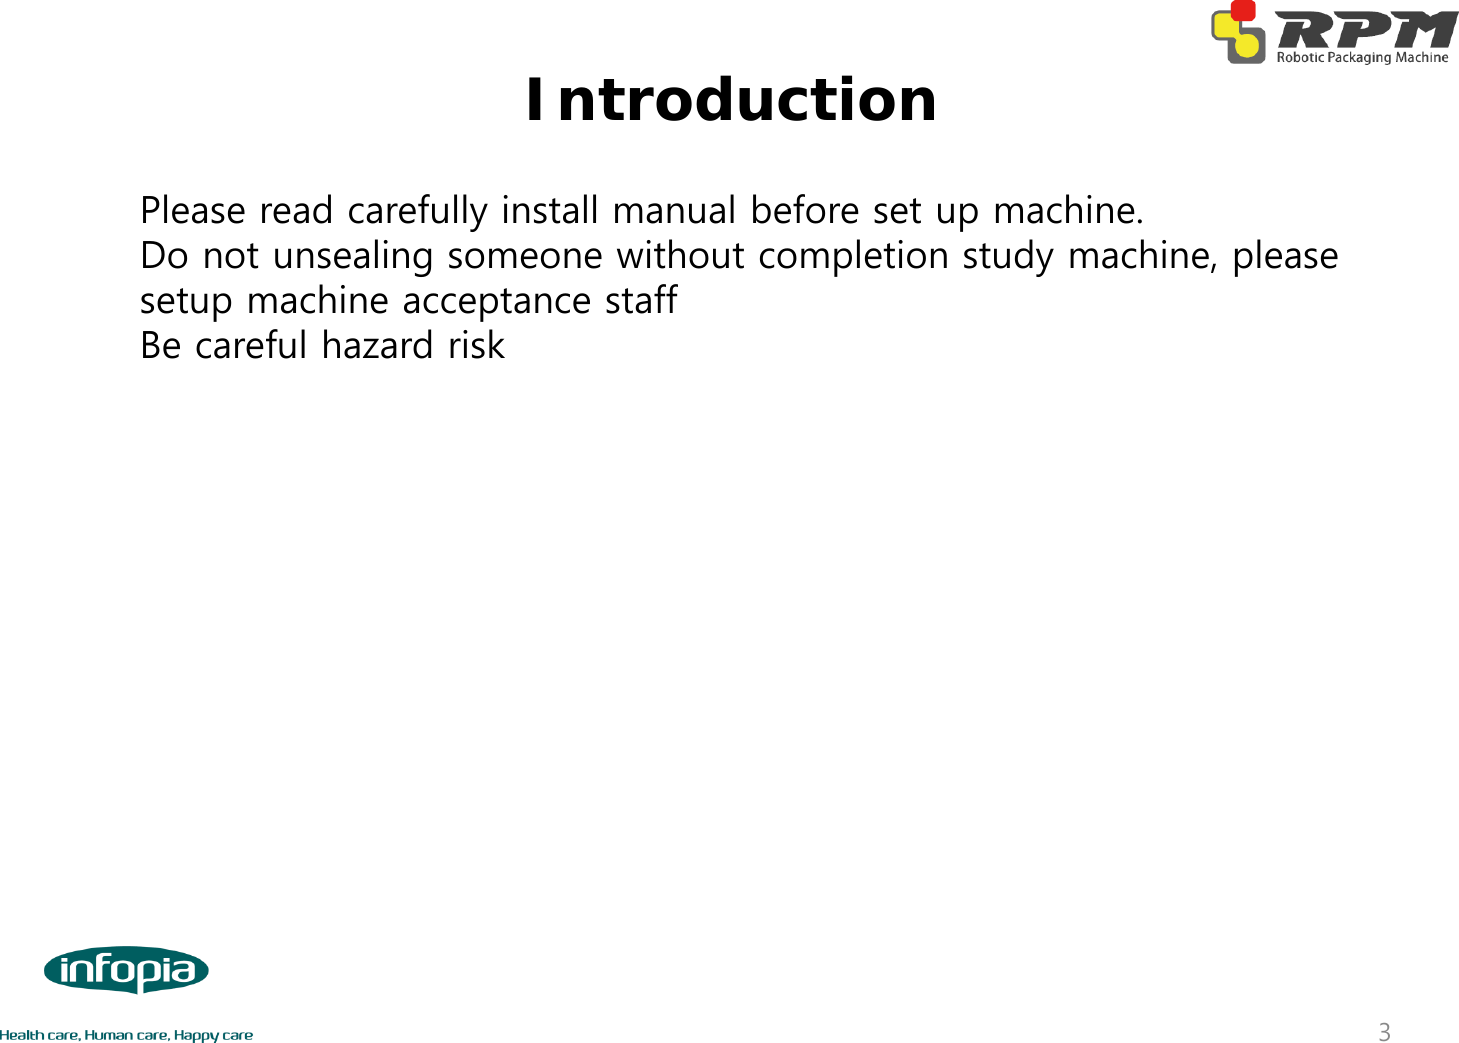 Introduction3Please read carefully install manual before set up machine.Do not unsealing someone without completion study machine, pleasesetup machine acceptance staffBe careful hazard risk